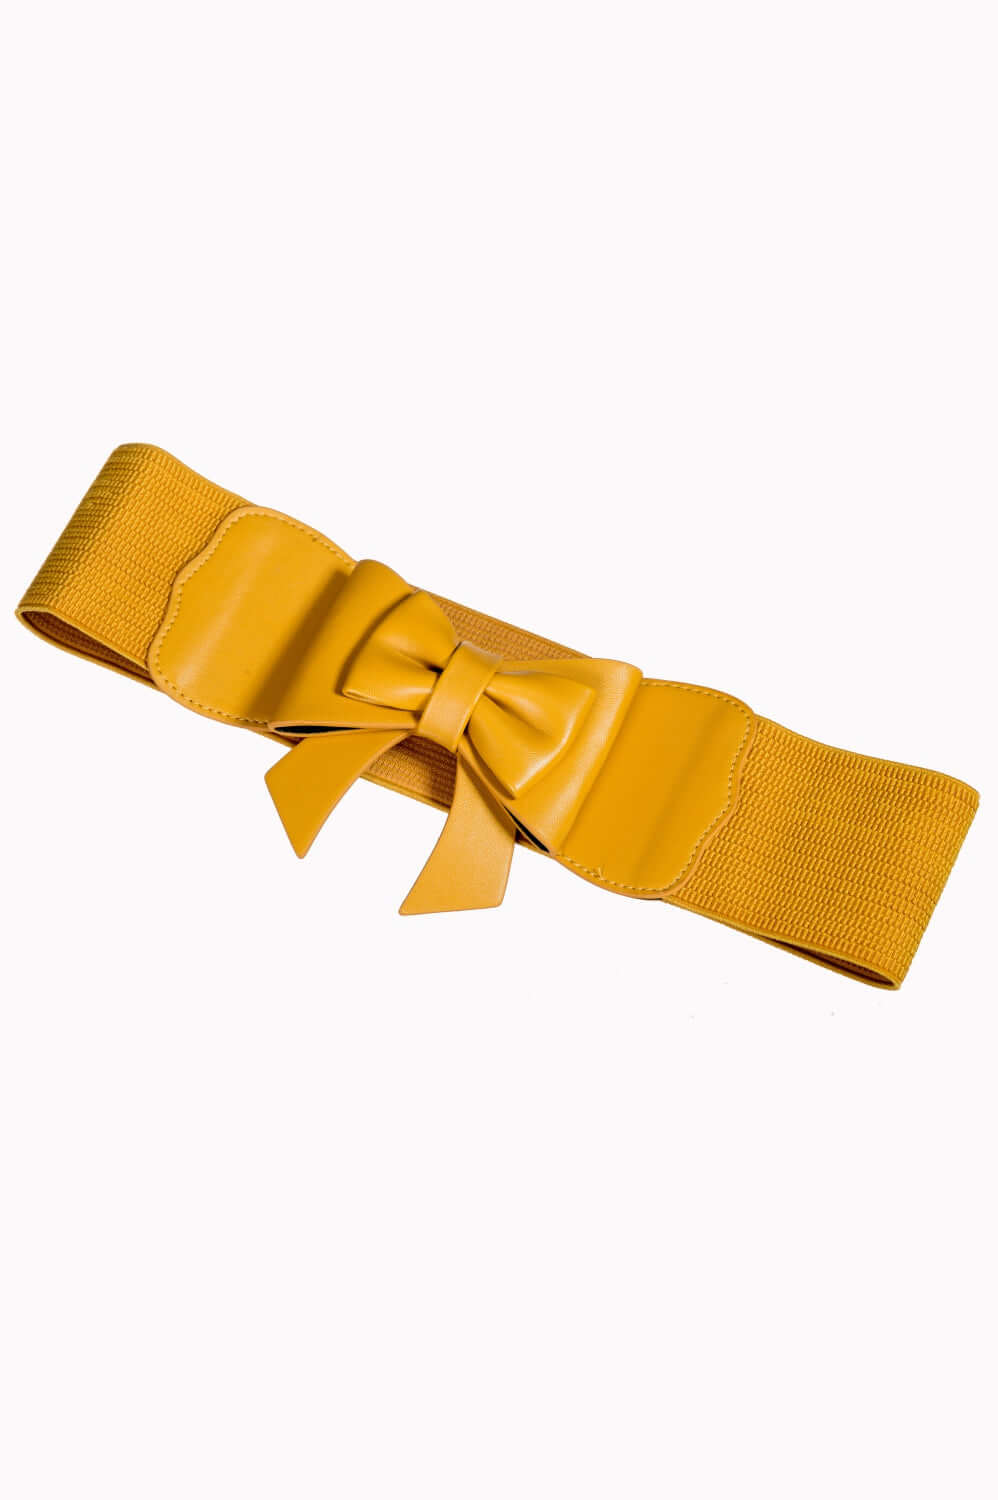 Dancing Days 50s Style Retro Elasticated Belt With Bow In Mustard Yellow; Dancing Days; 50s Retro Style; Elasticated Belt; Mustard Yellow Bow Design; Yellow